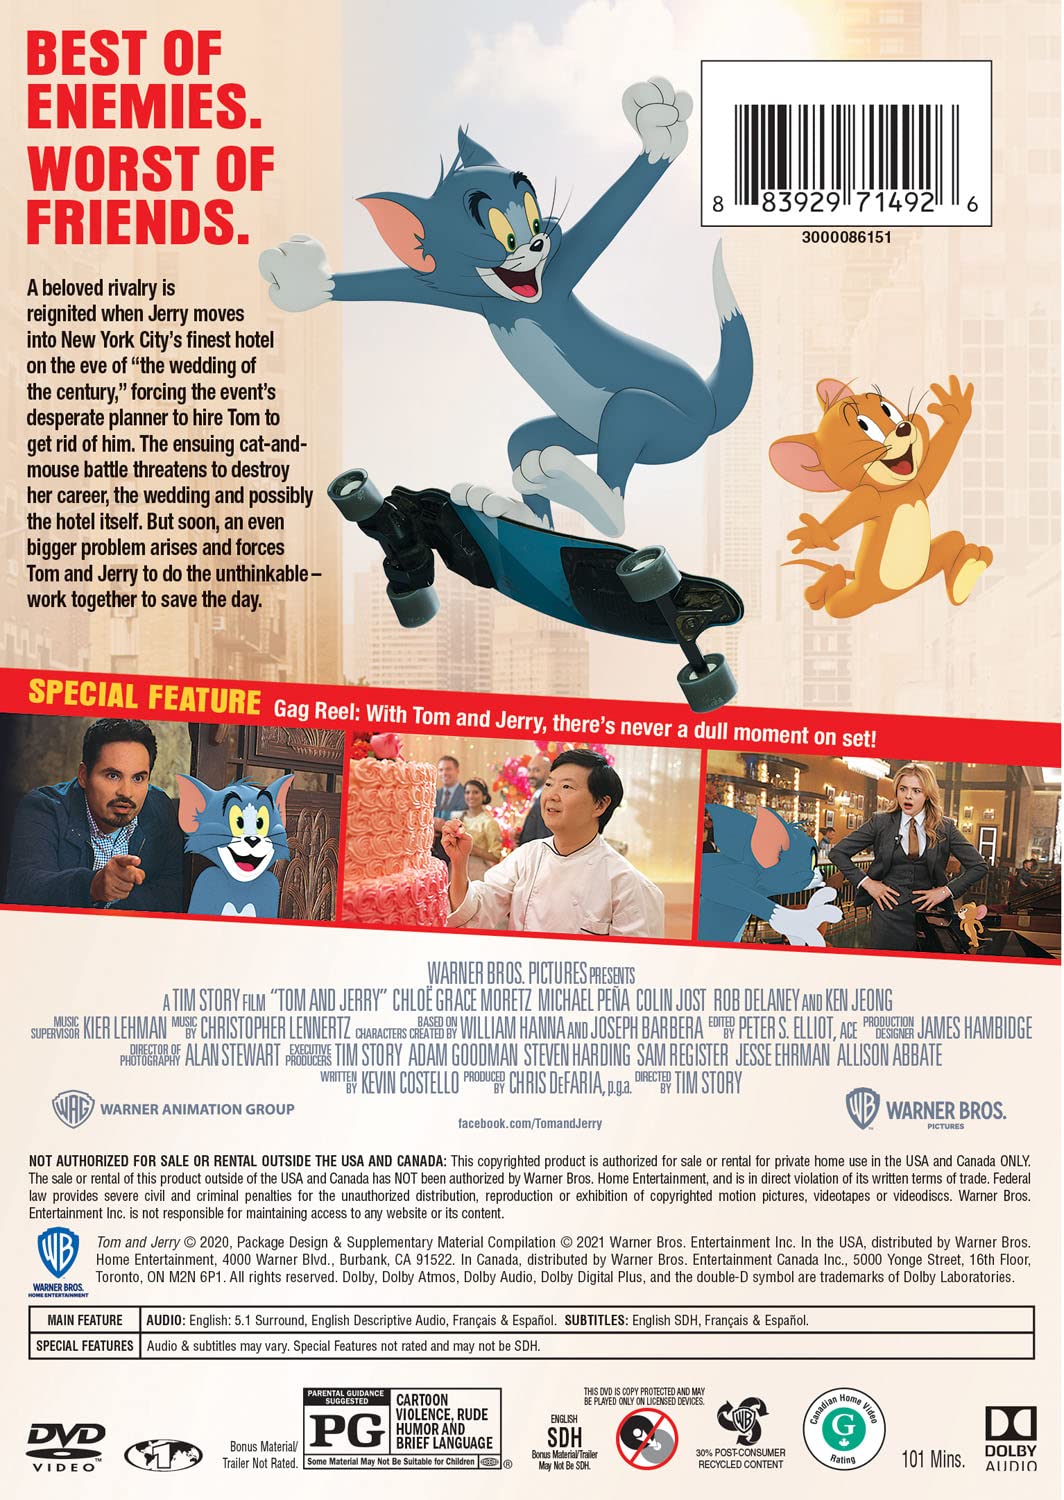 Tom and Jerry: The Movie (DVD + Digital Copy) - image 2 of 2